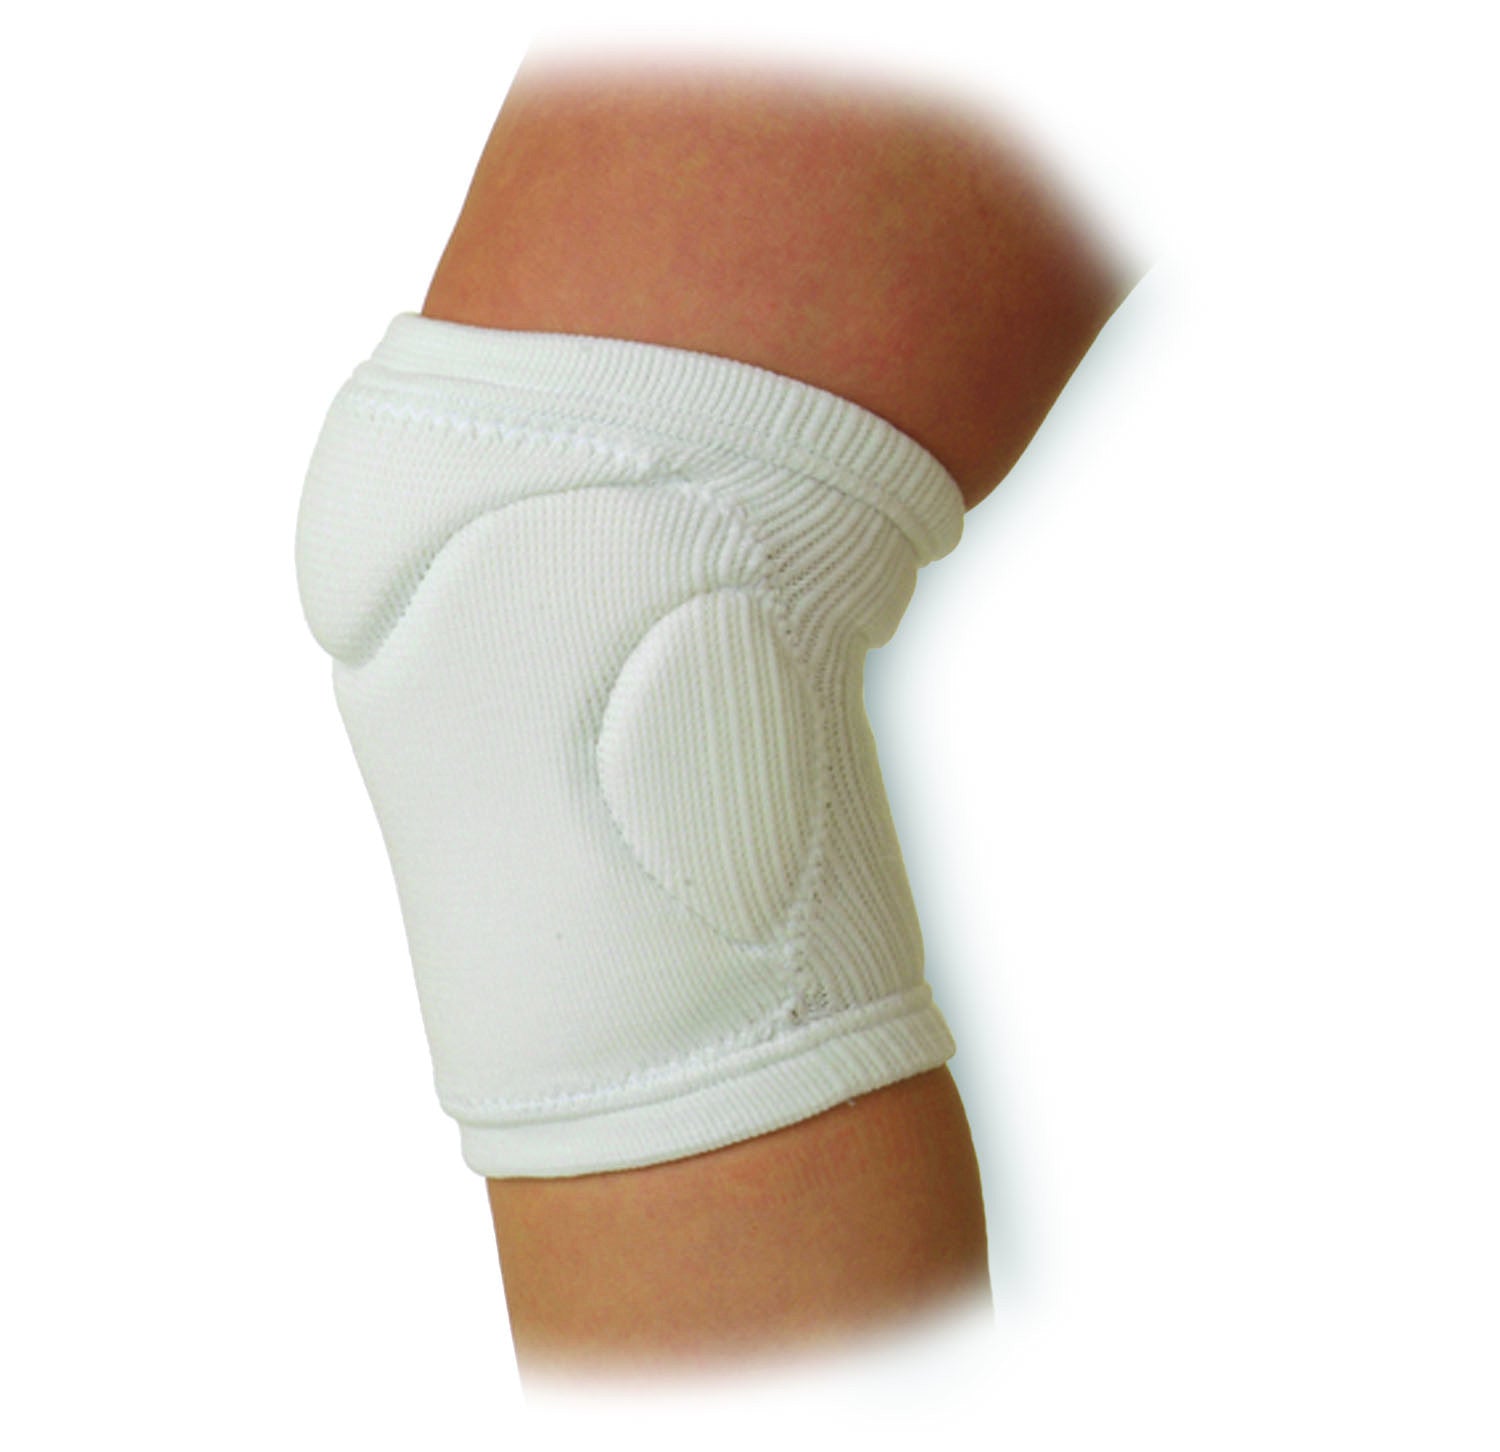 Volleyball Knee Pad - SafeTGard